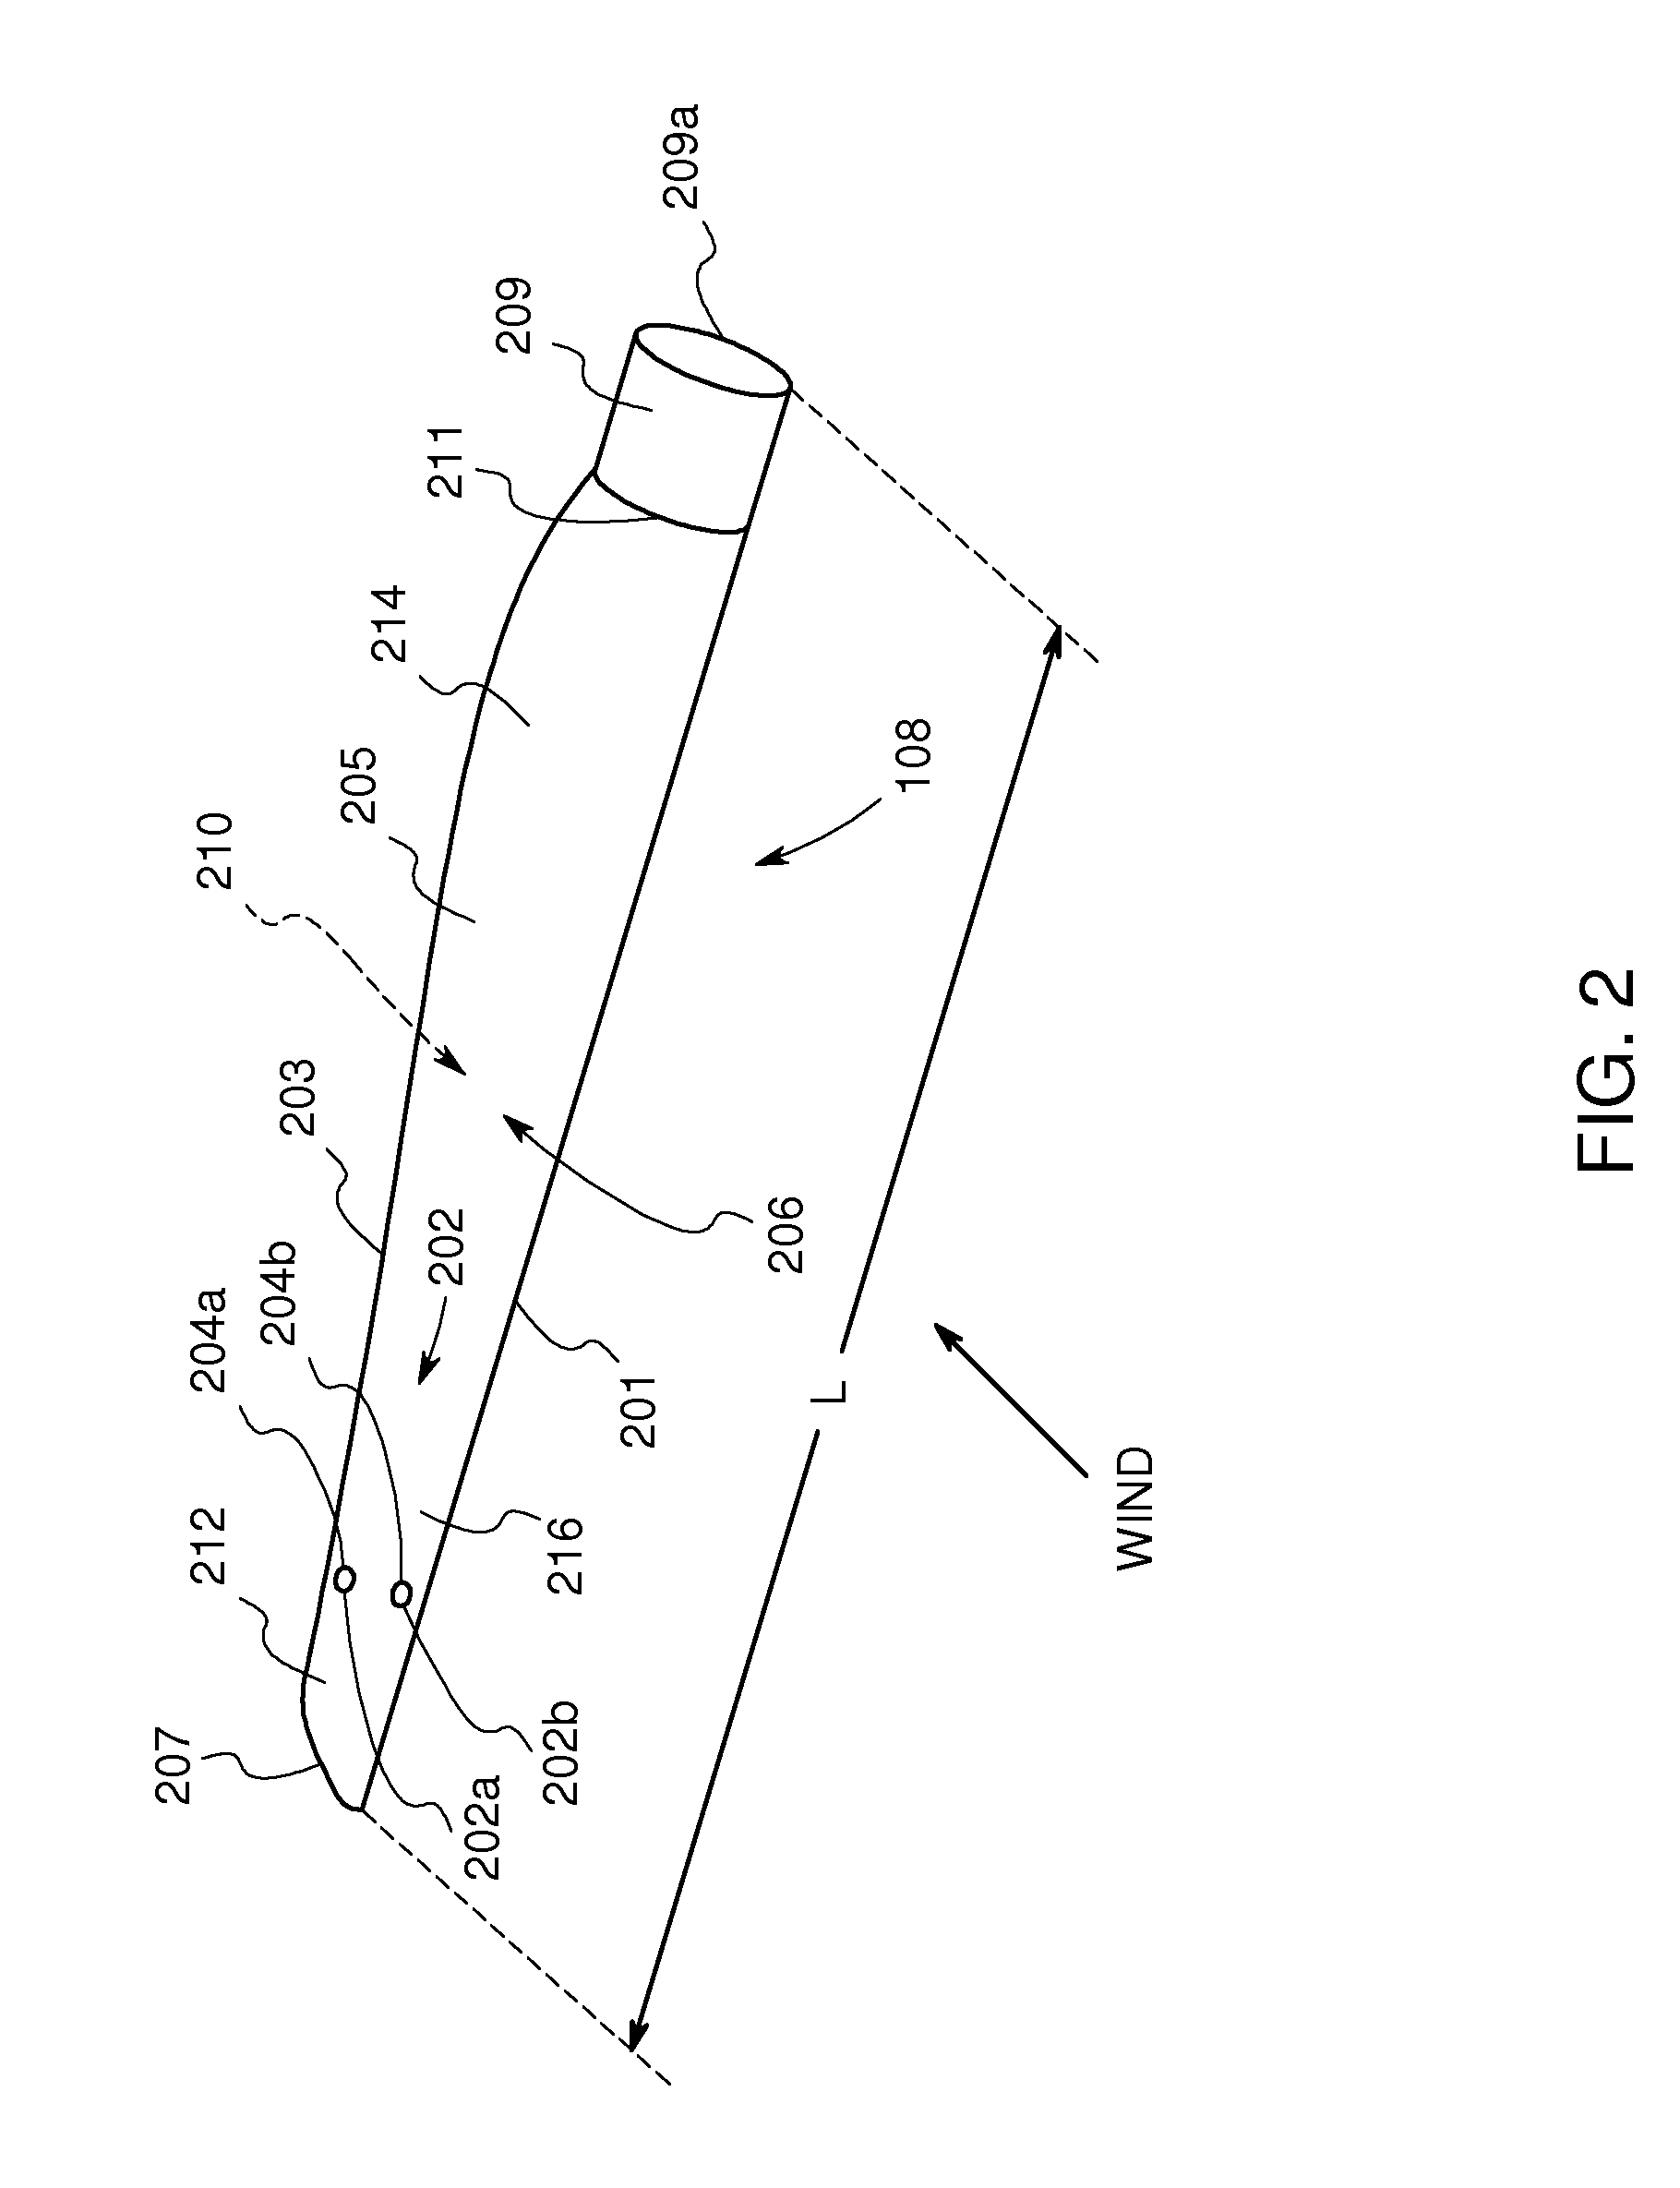 Wind turbine blade with foreign matter detection devices